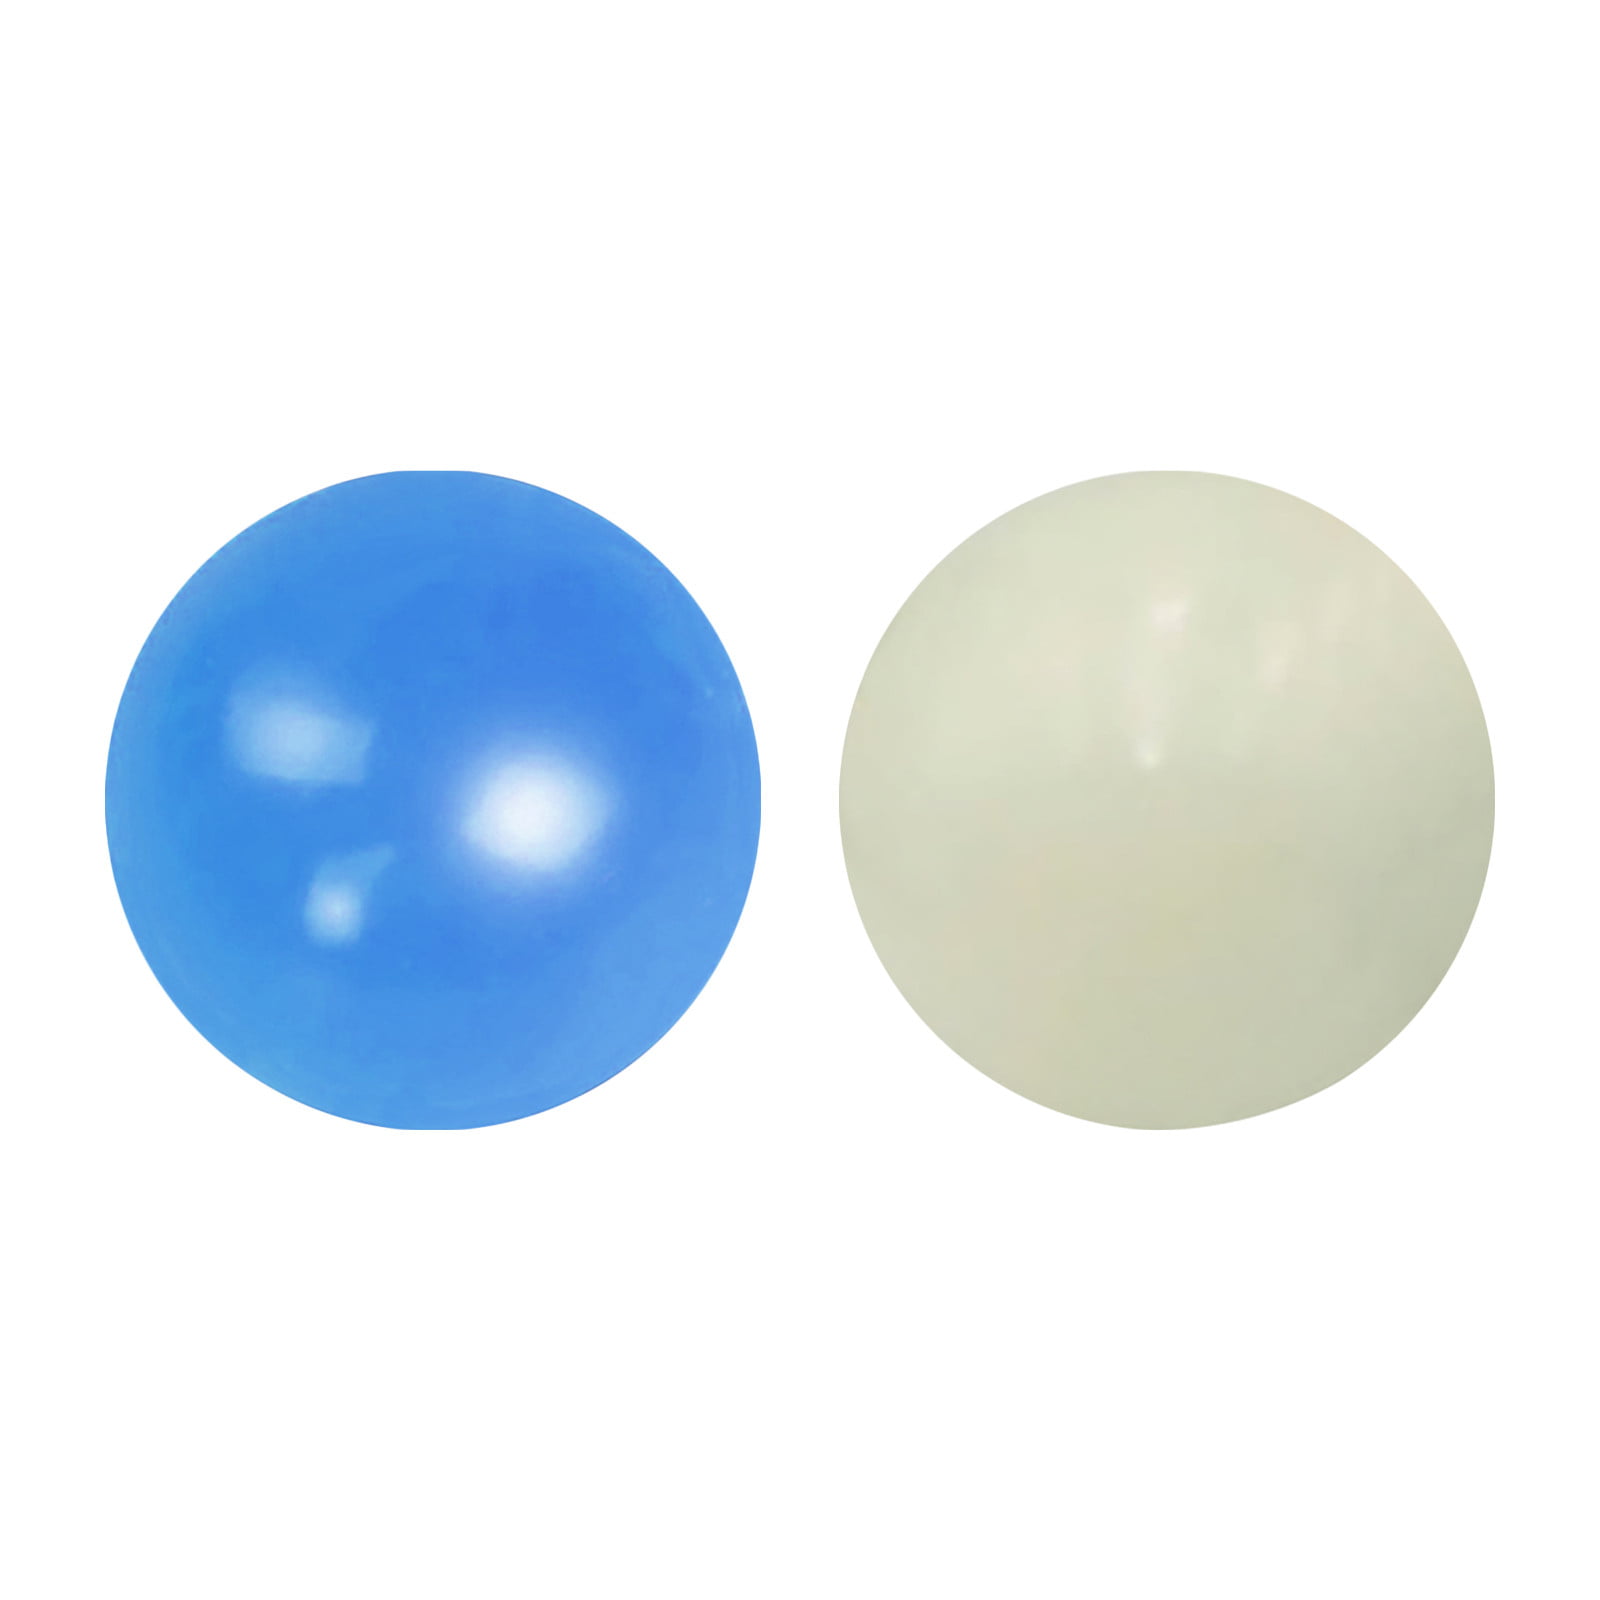 Details about   Fluorescent Sticky Wall Balls Sticky Target Ball Decompression Gift Toys D4X9 